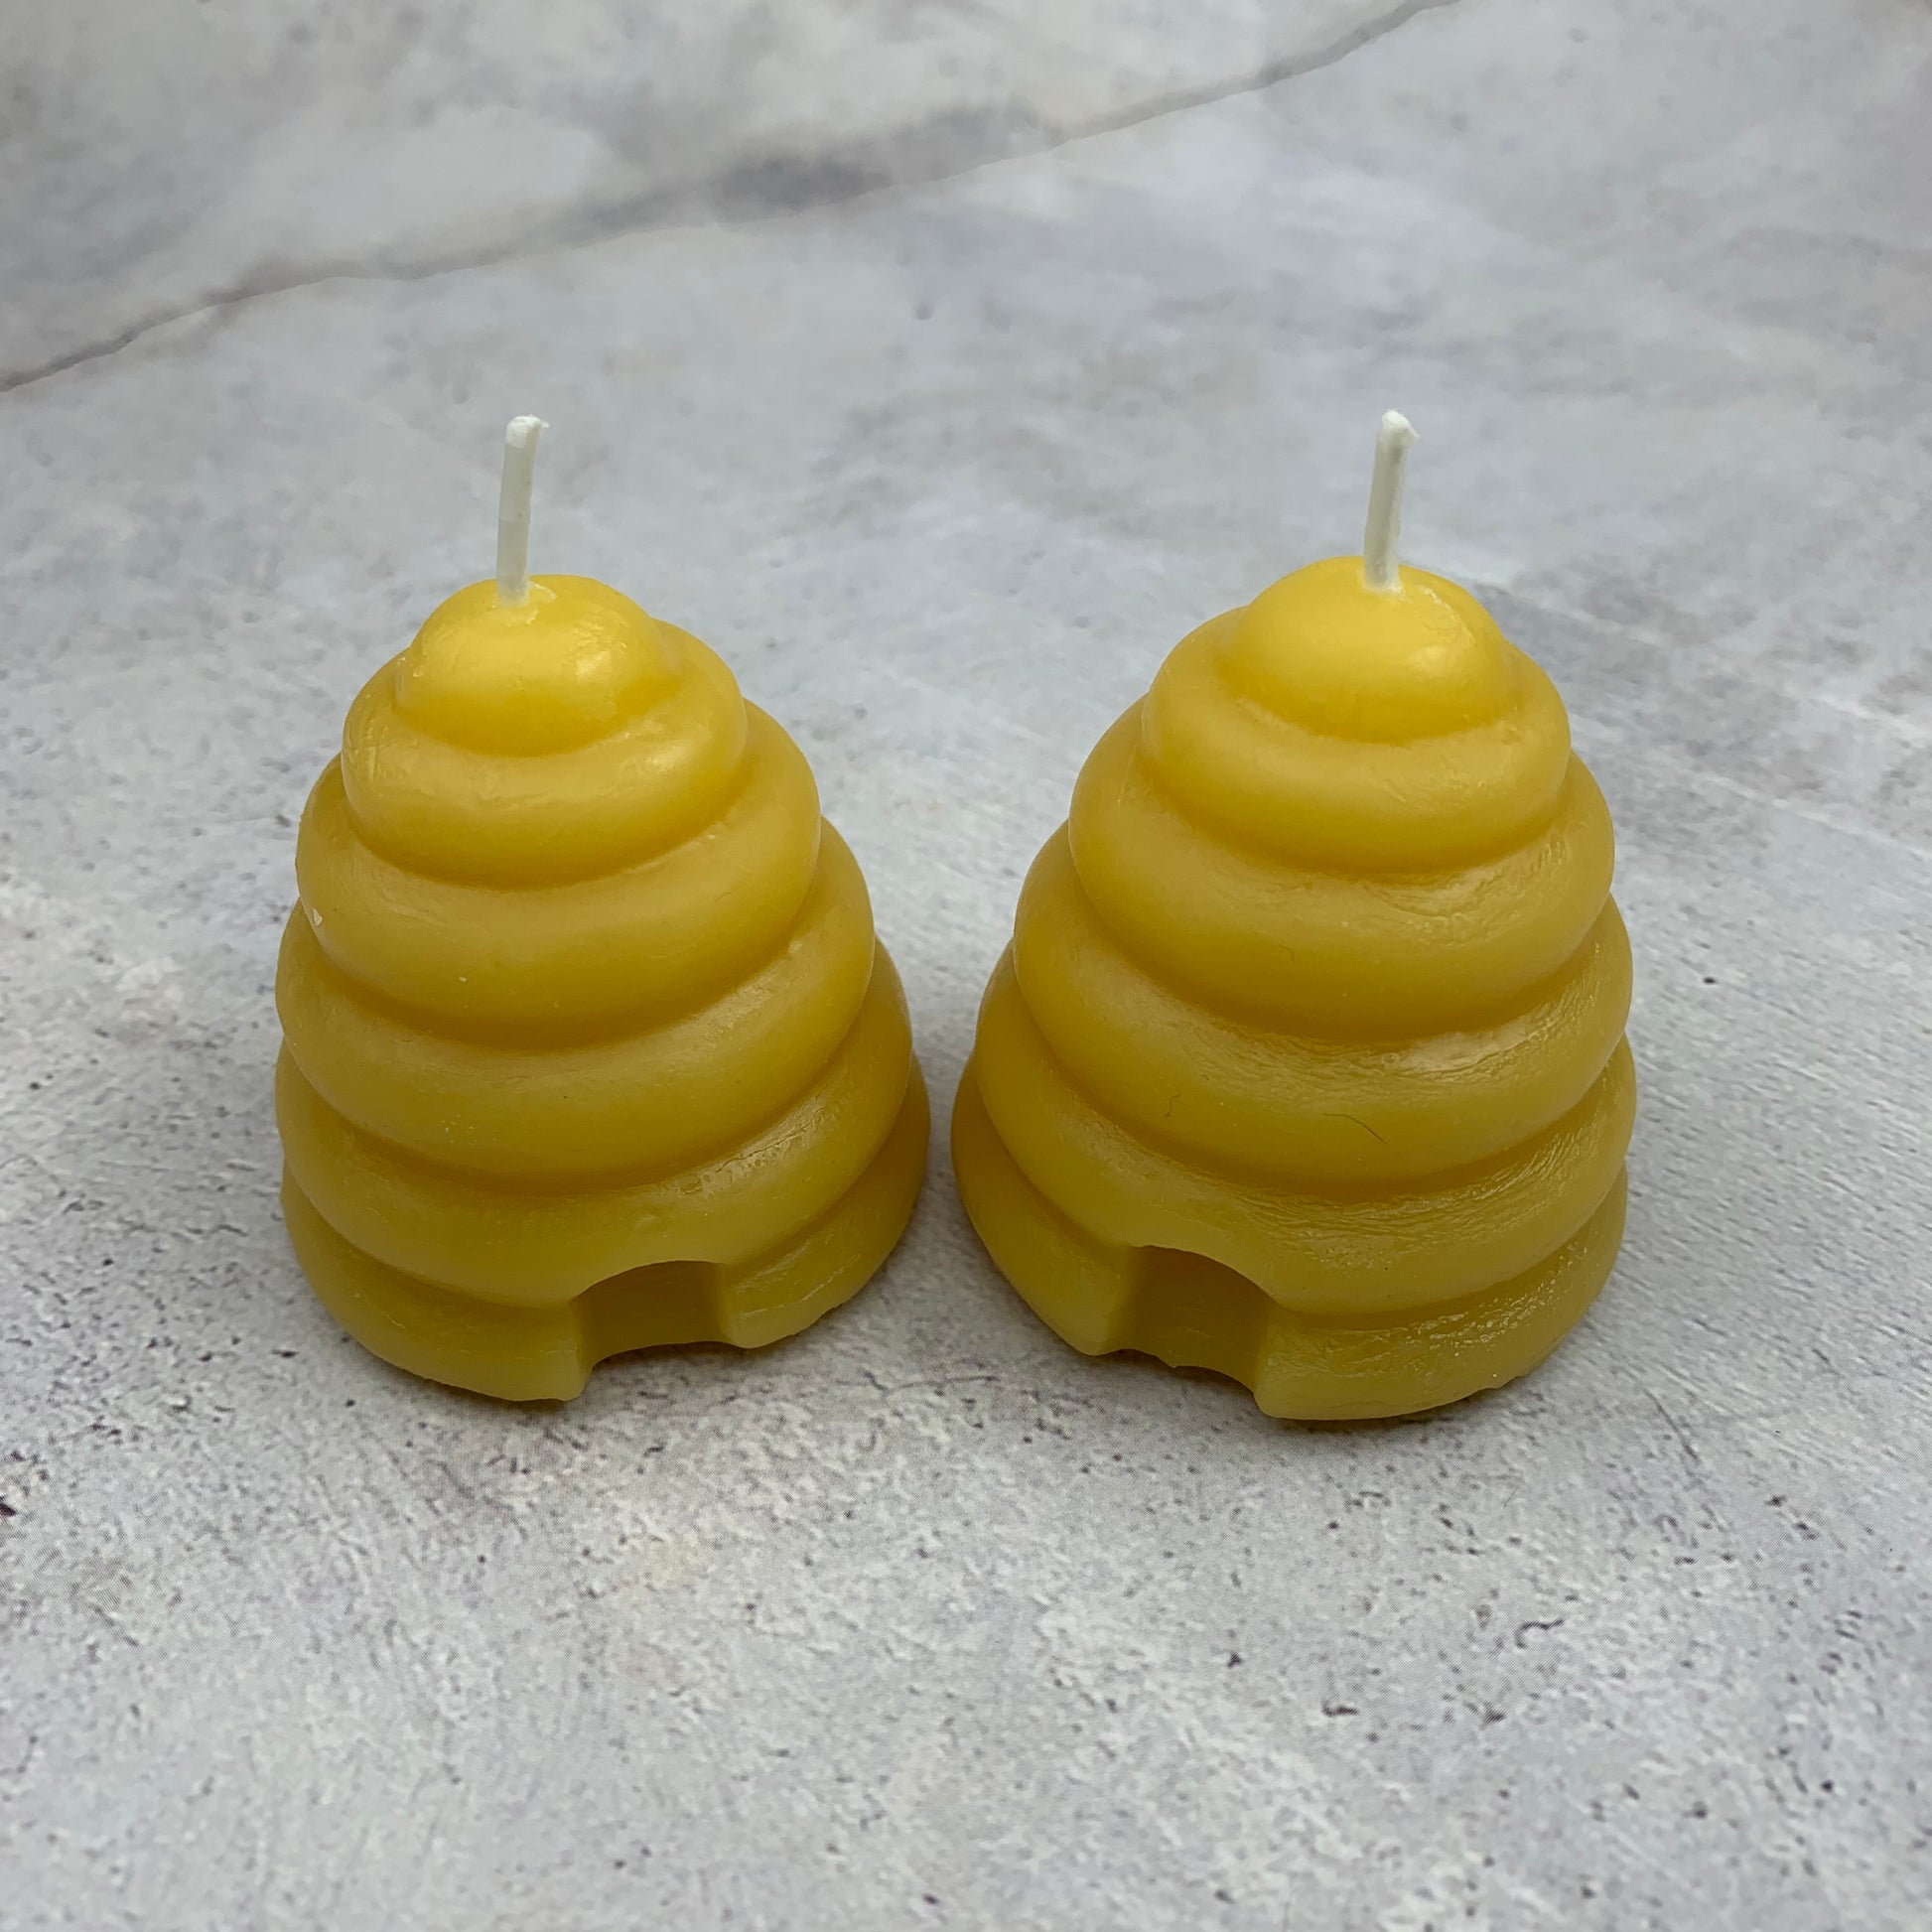 100% Pure and All Natural, Canadian Women Owned Beeswax Beehive Votive